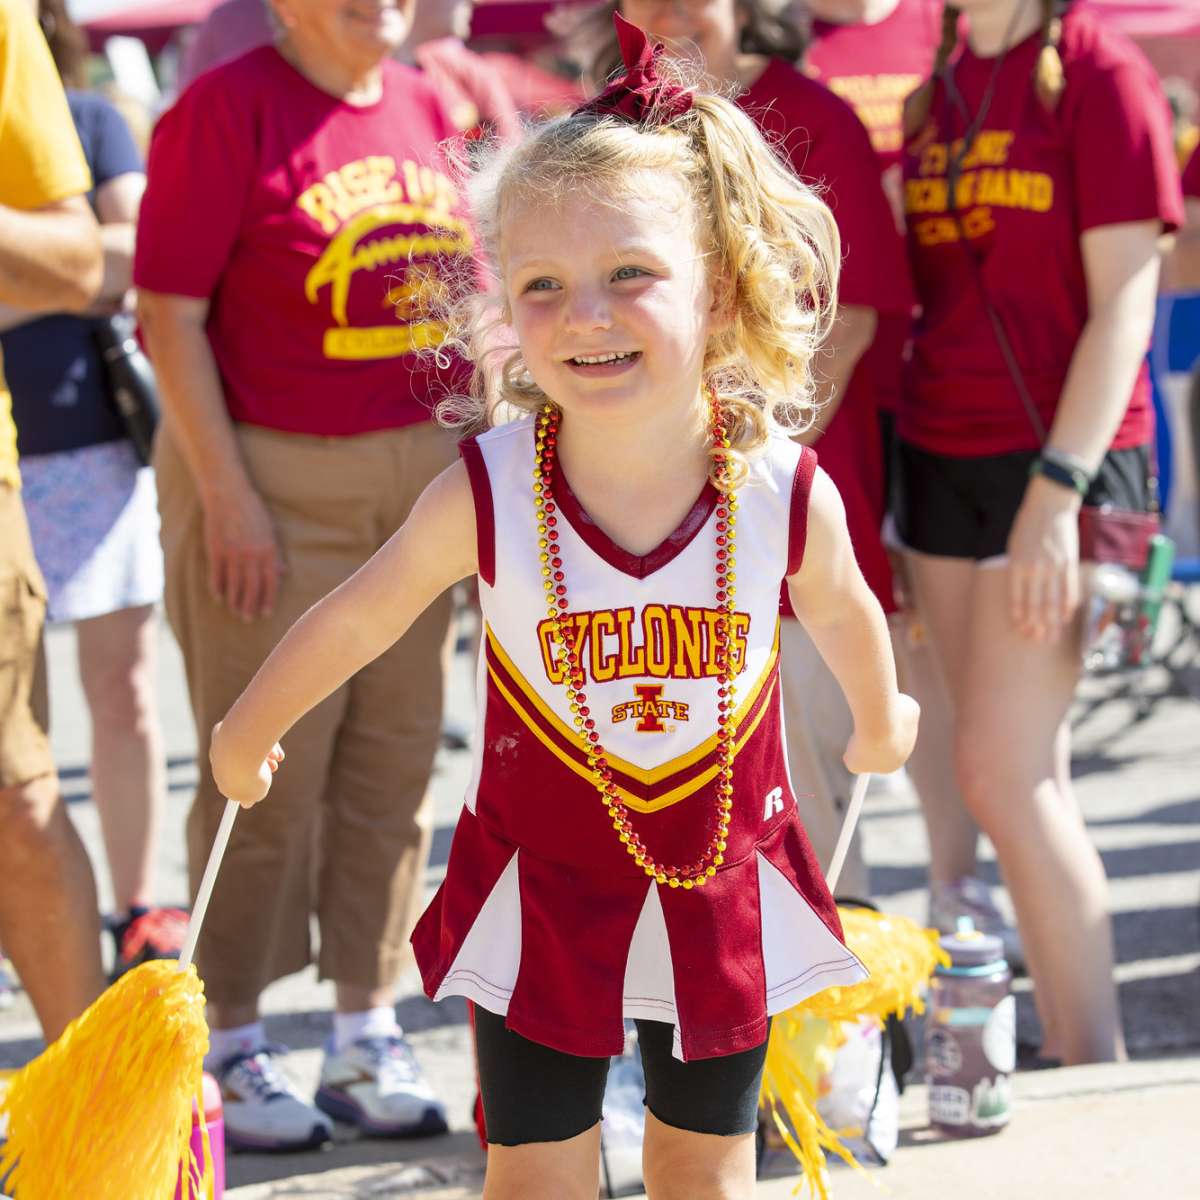 Young Cyclone fan at Cyclone Central